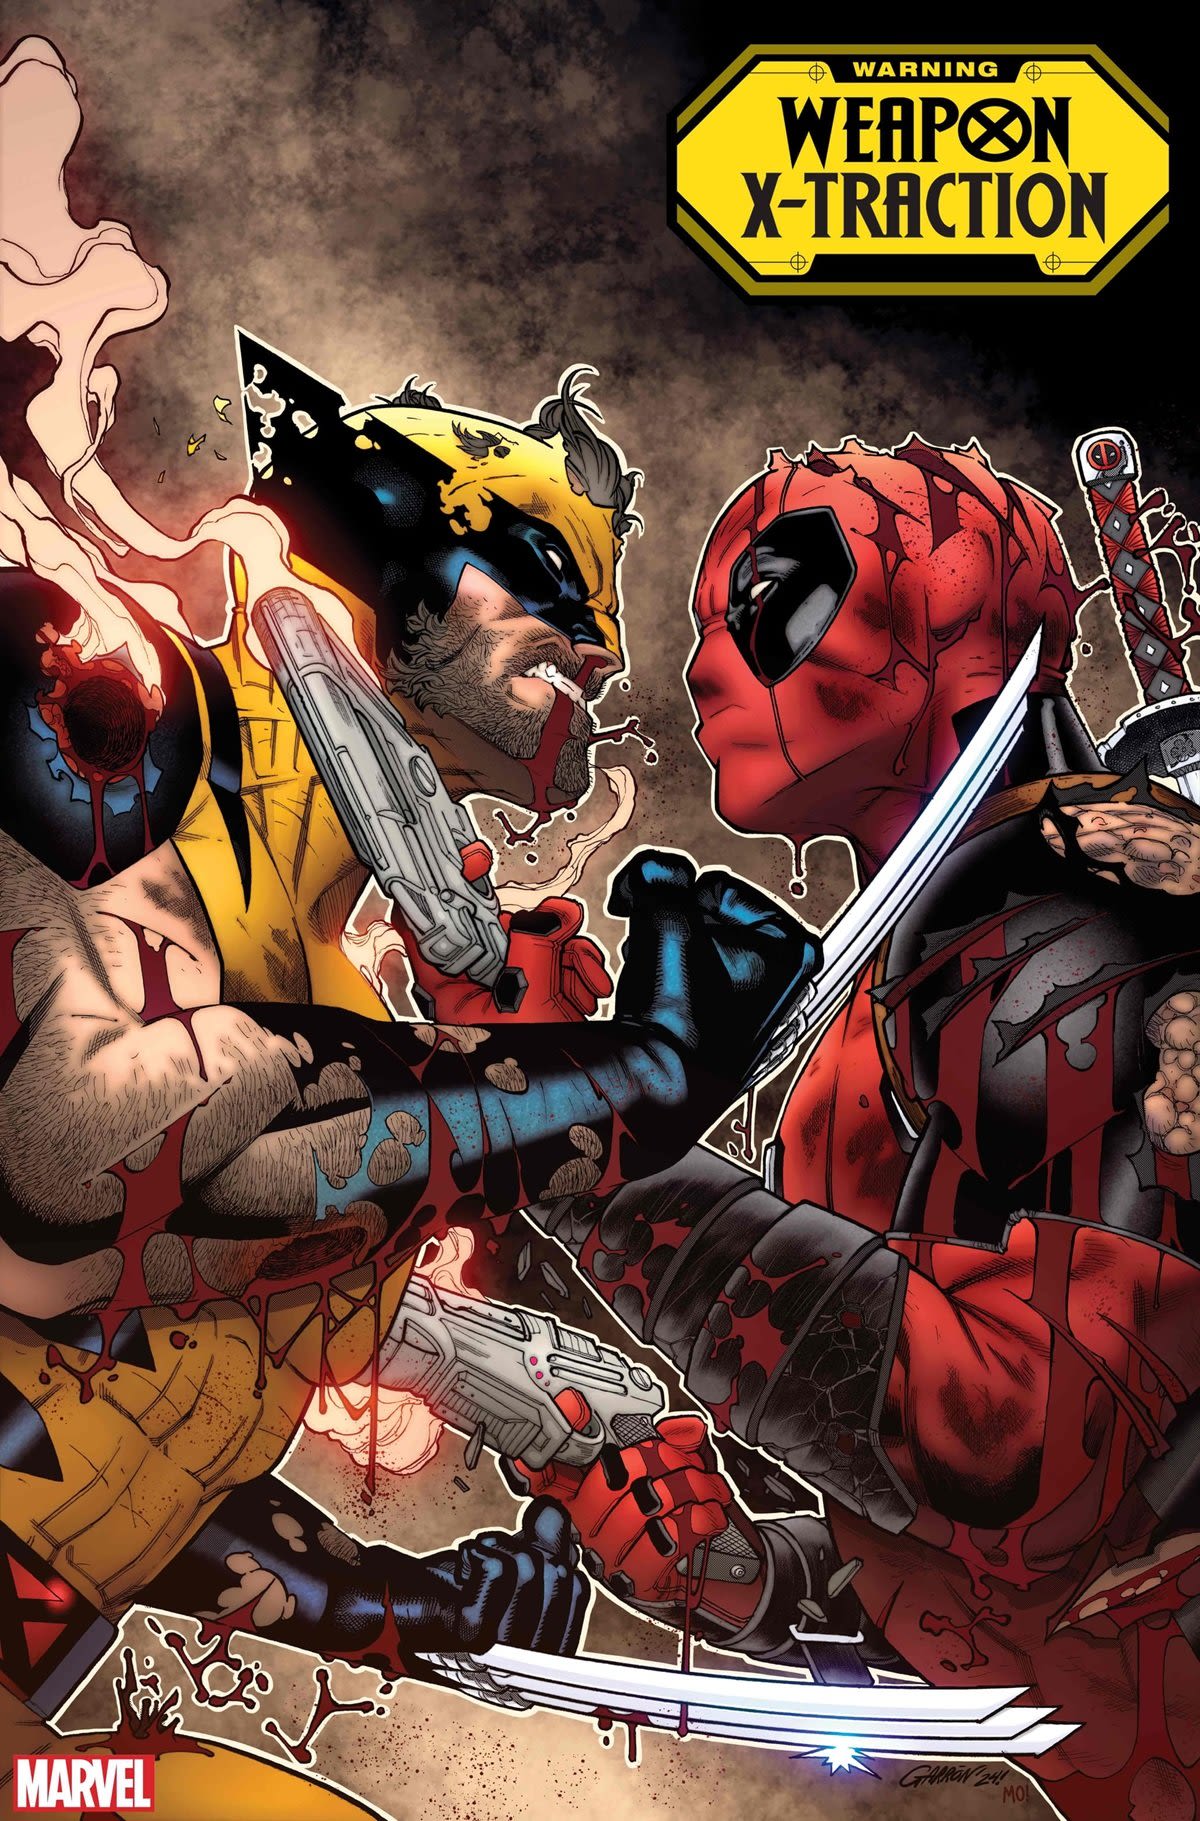 Deadpool and Wolverine Marvel Comics Event Story Coming This Summer